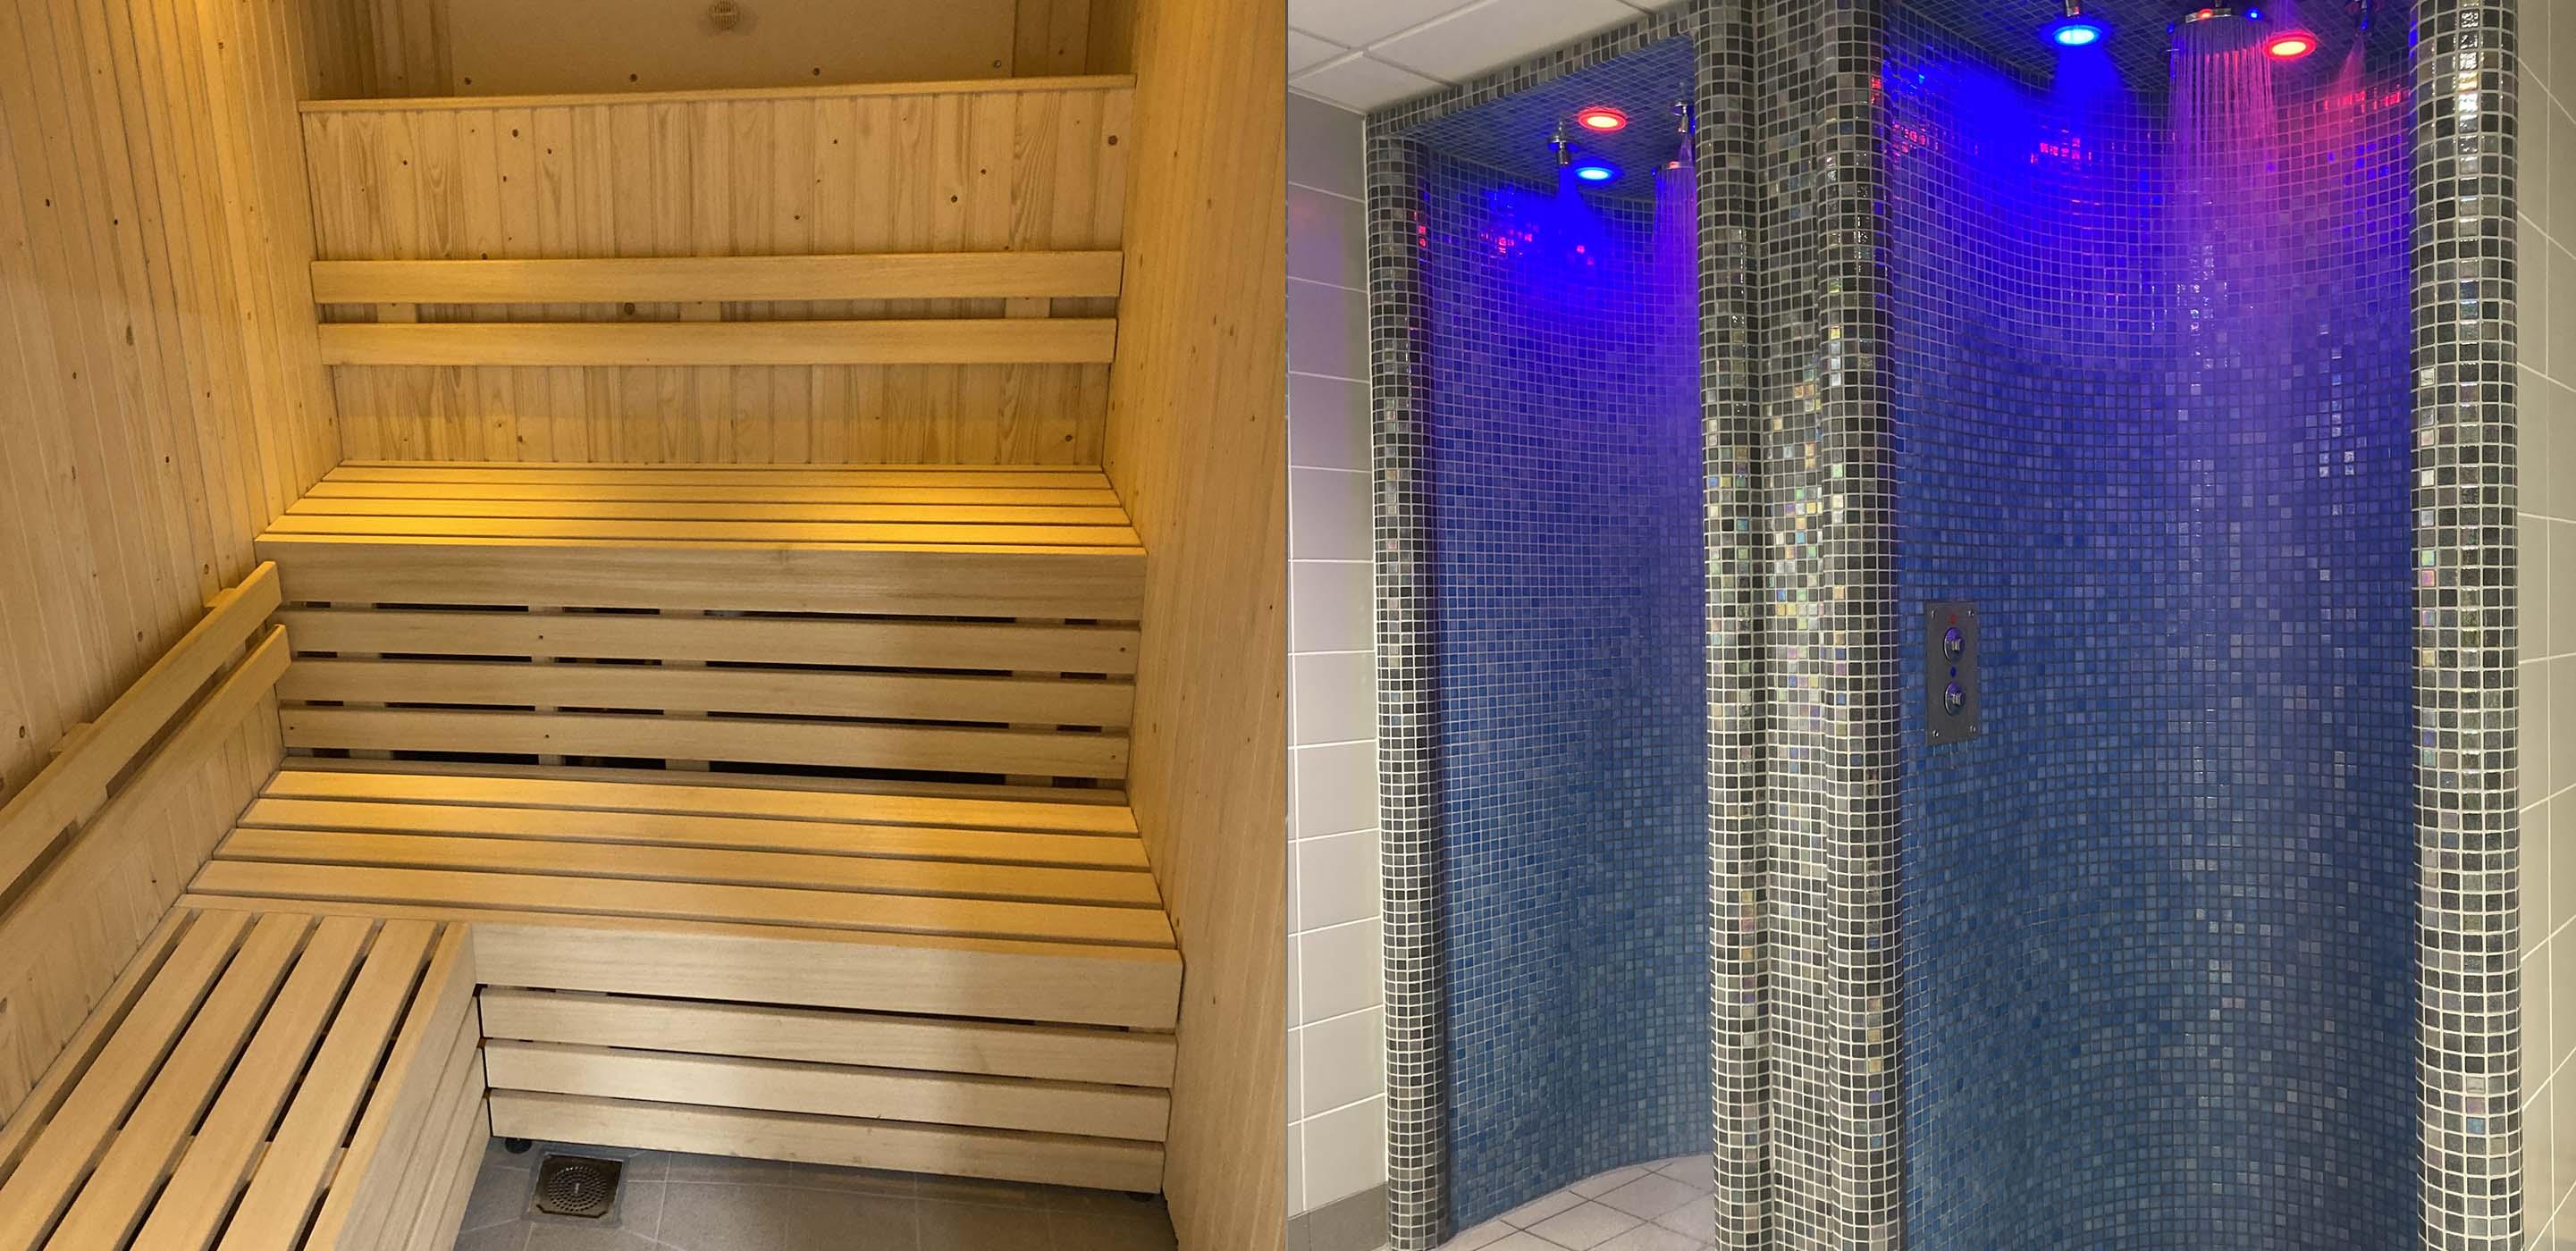 sauna and showers at the Jack Laugher Leisure and Wellness Centre